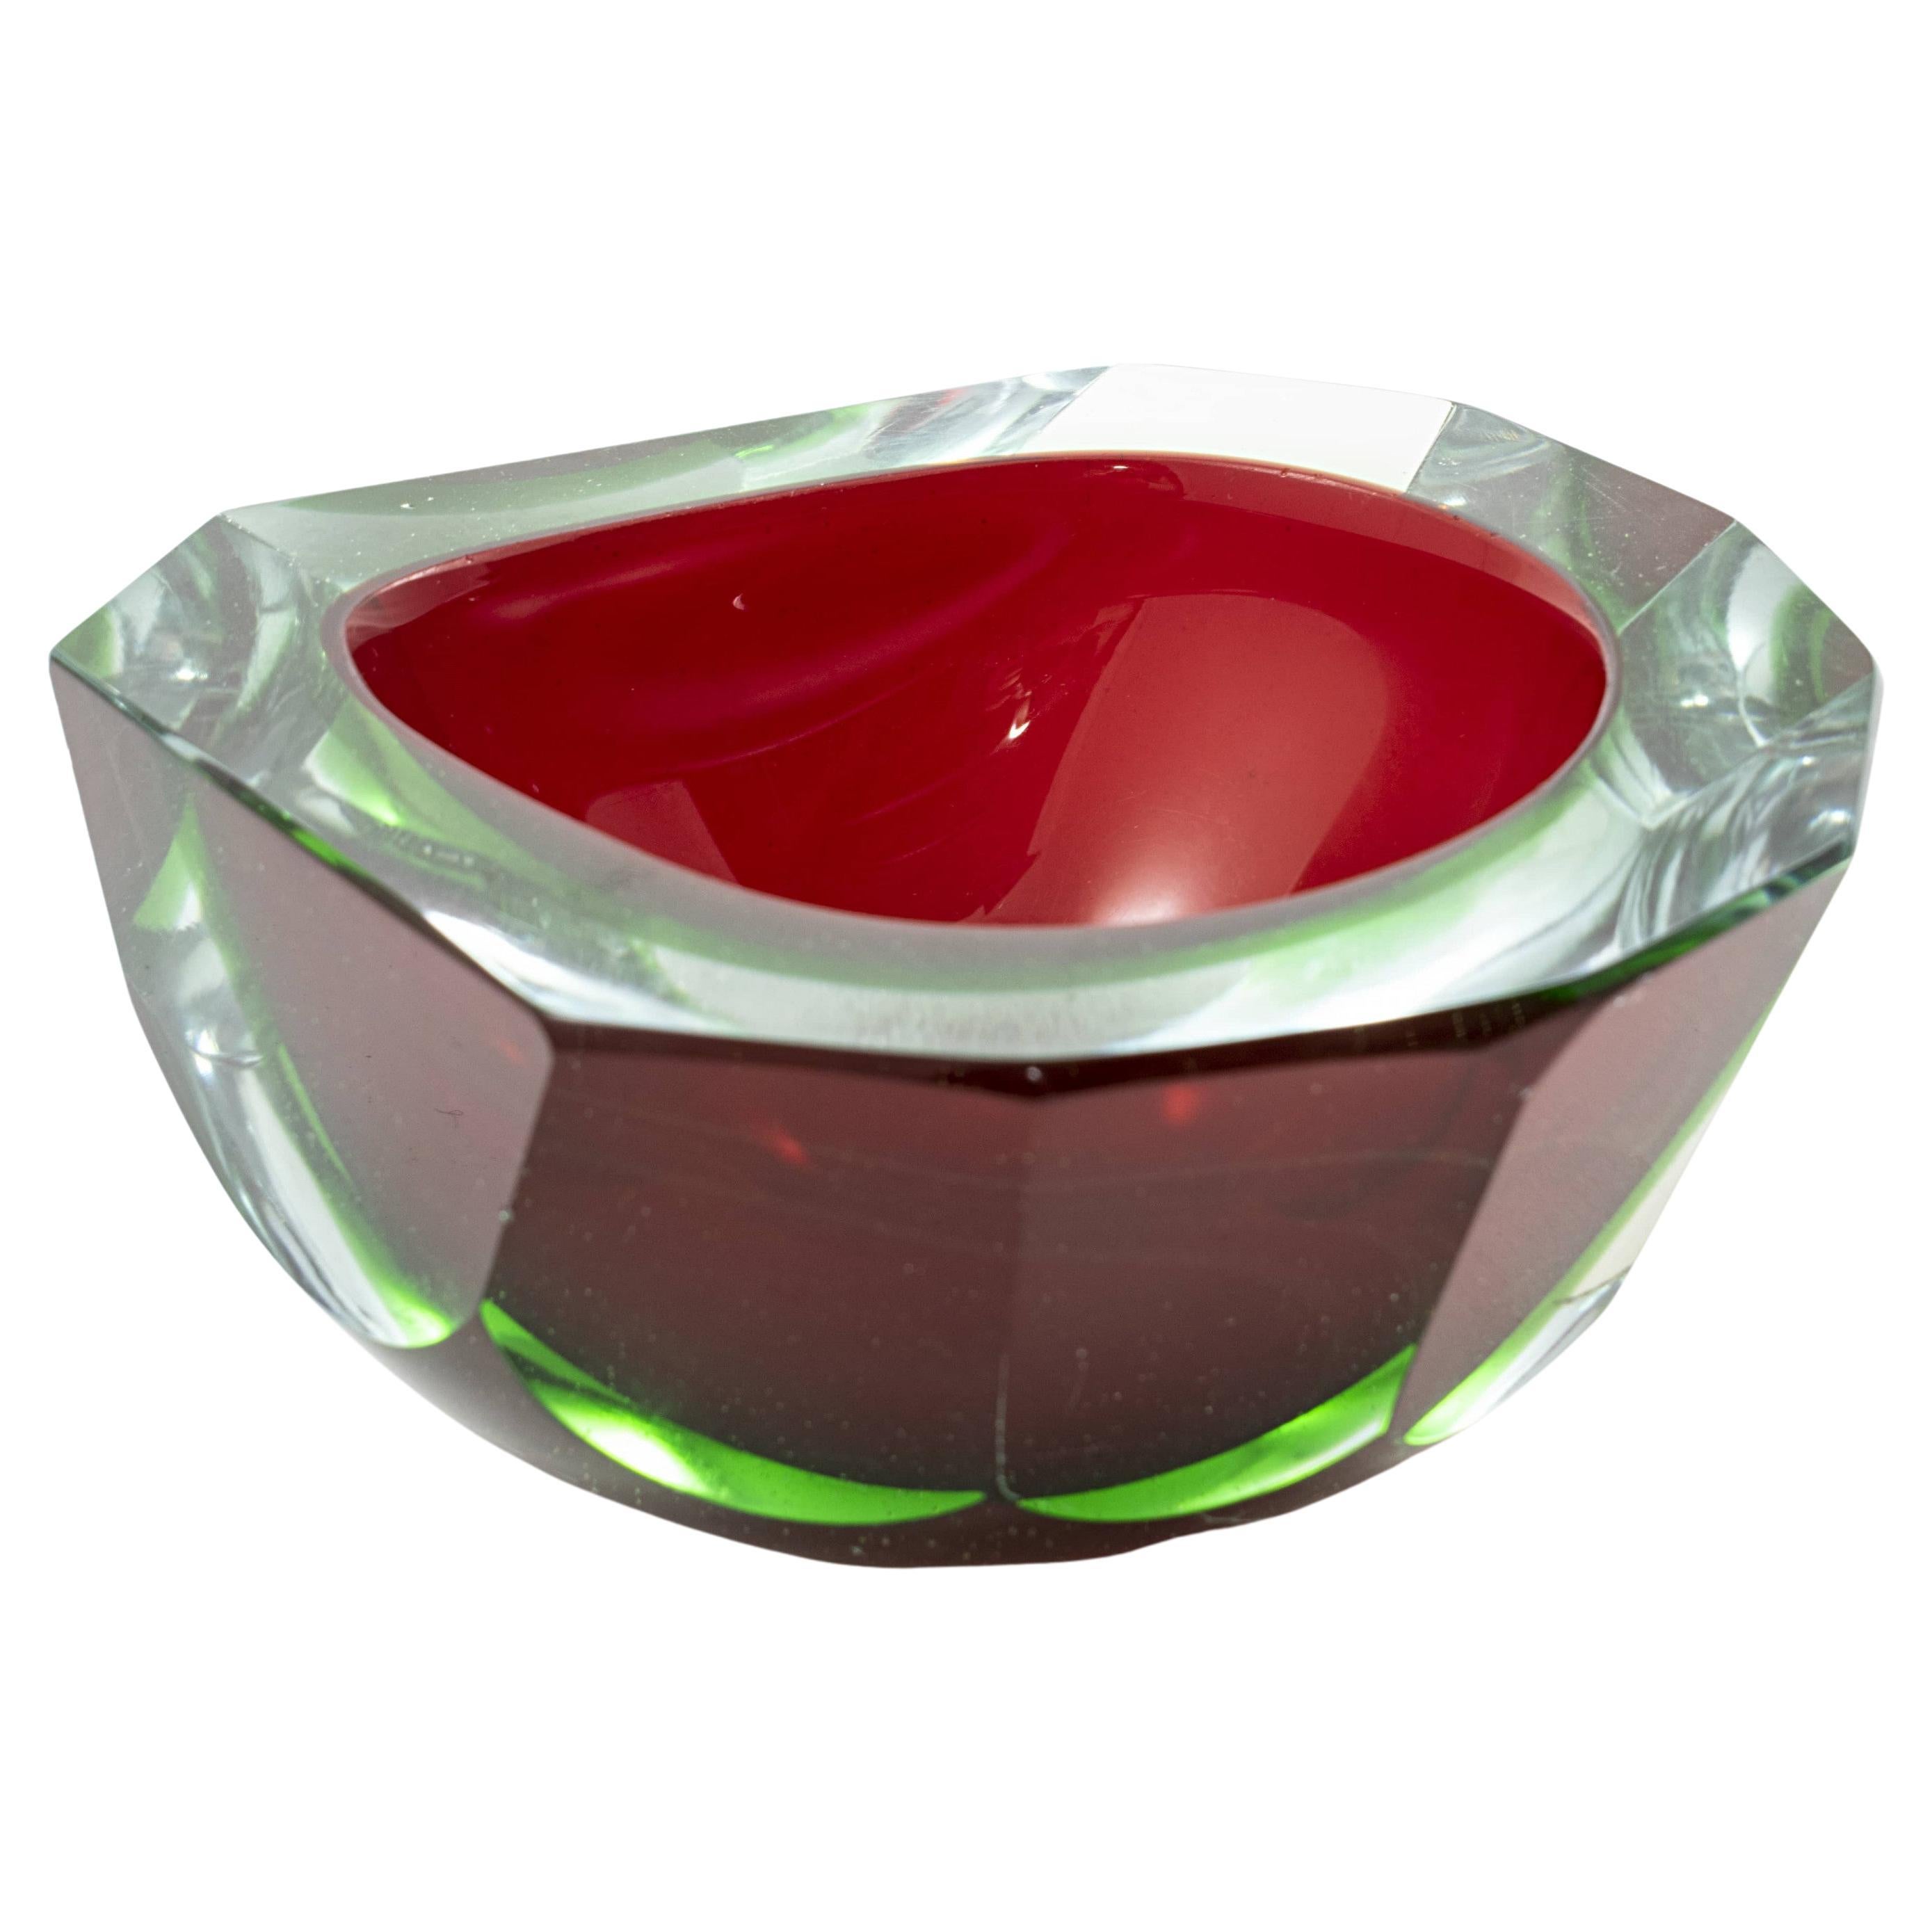 Murano Red and Green "Sommerso" Glass Ashtray or Bowl